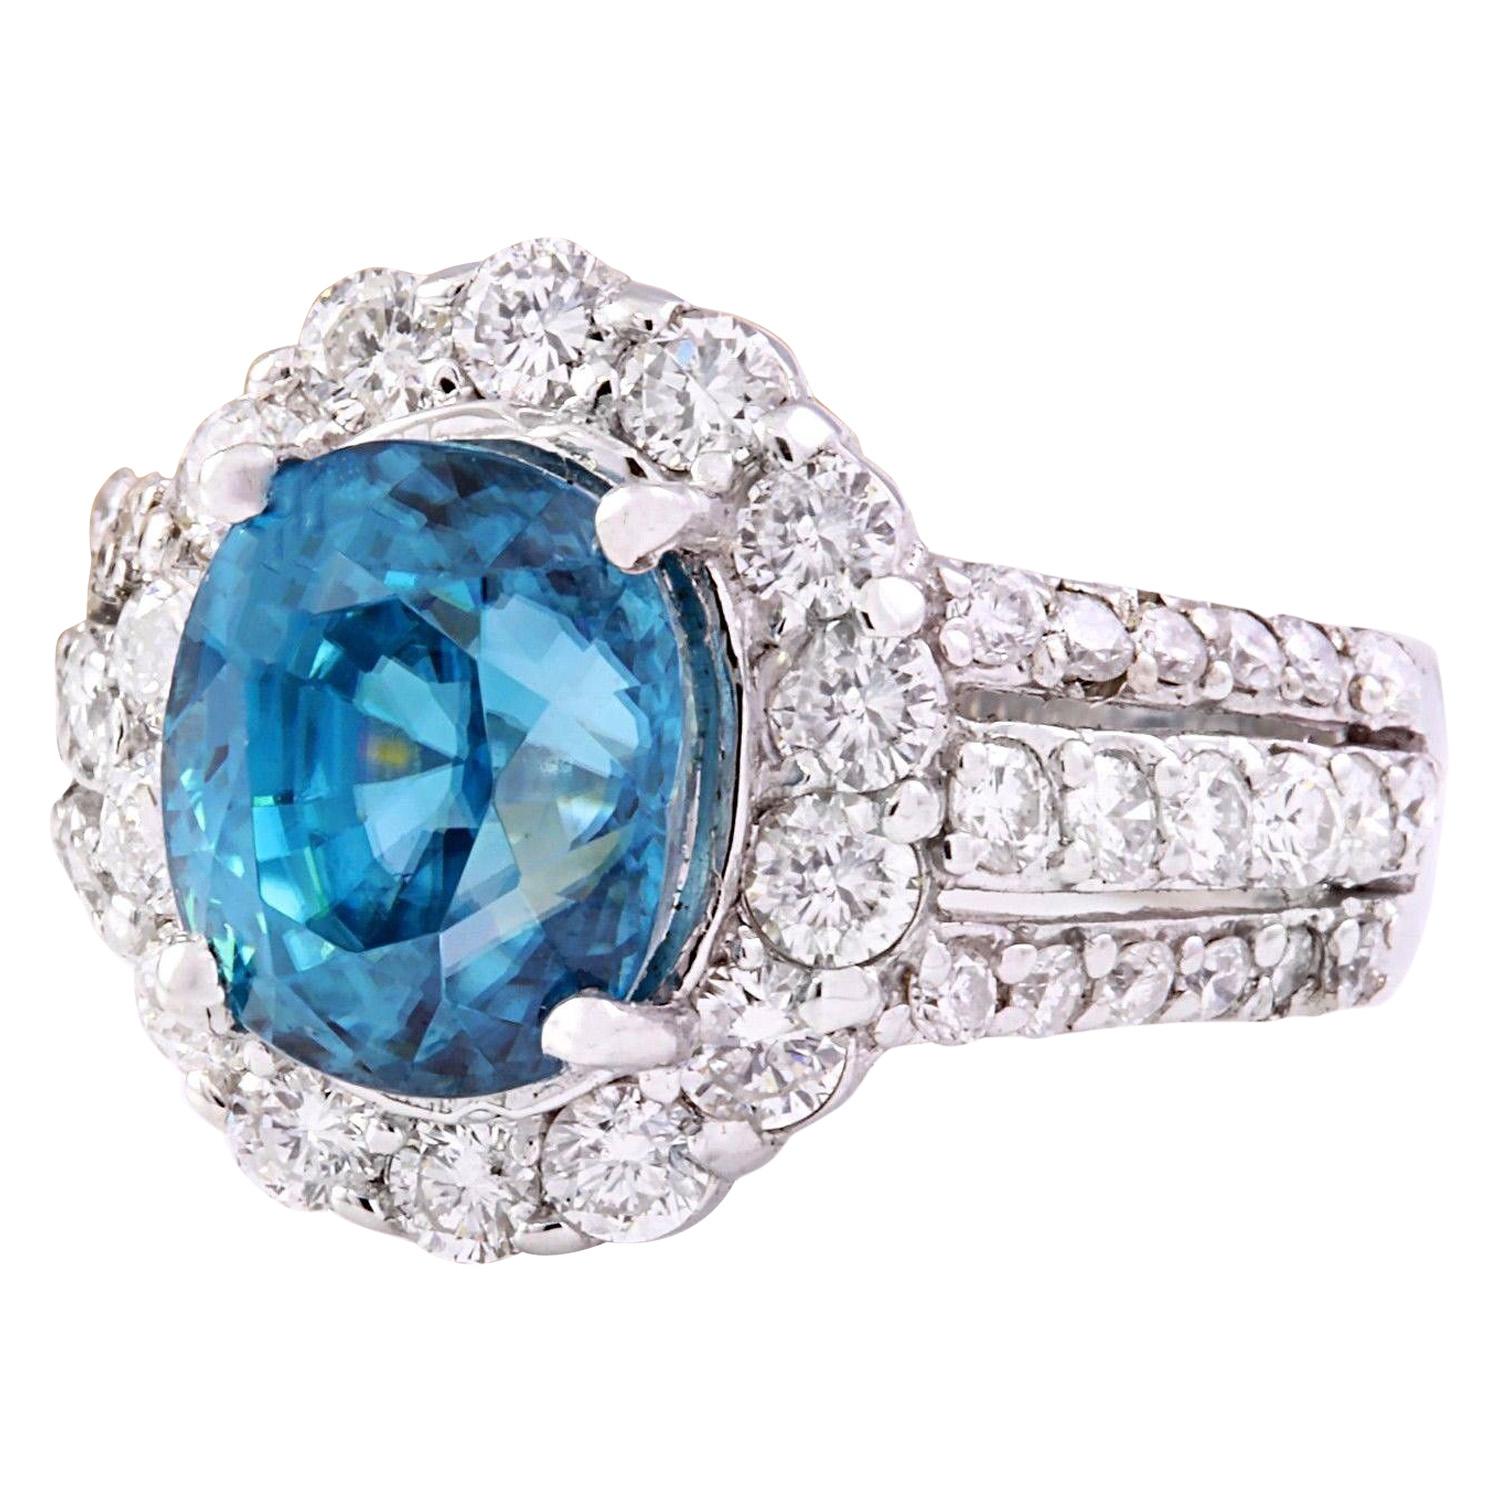 7.70 Carat  Zircon 14K Solid White Gold Diamond Ring
Item Type: Ring
Item Style: Engagement
Material: 14K White Gold
Mainstone: Zircon
Stone Color: Blue
Stone Weight: 6.10 Carat
Stone Shape: Oval
Stone Quantity: 1
Stone Dimensions: 10.00x8.00